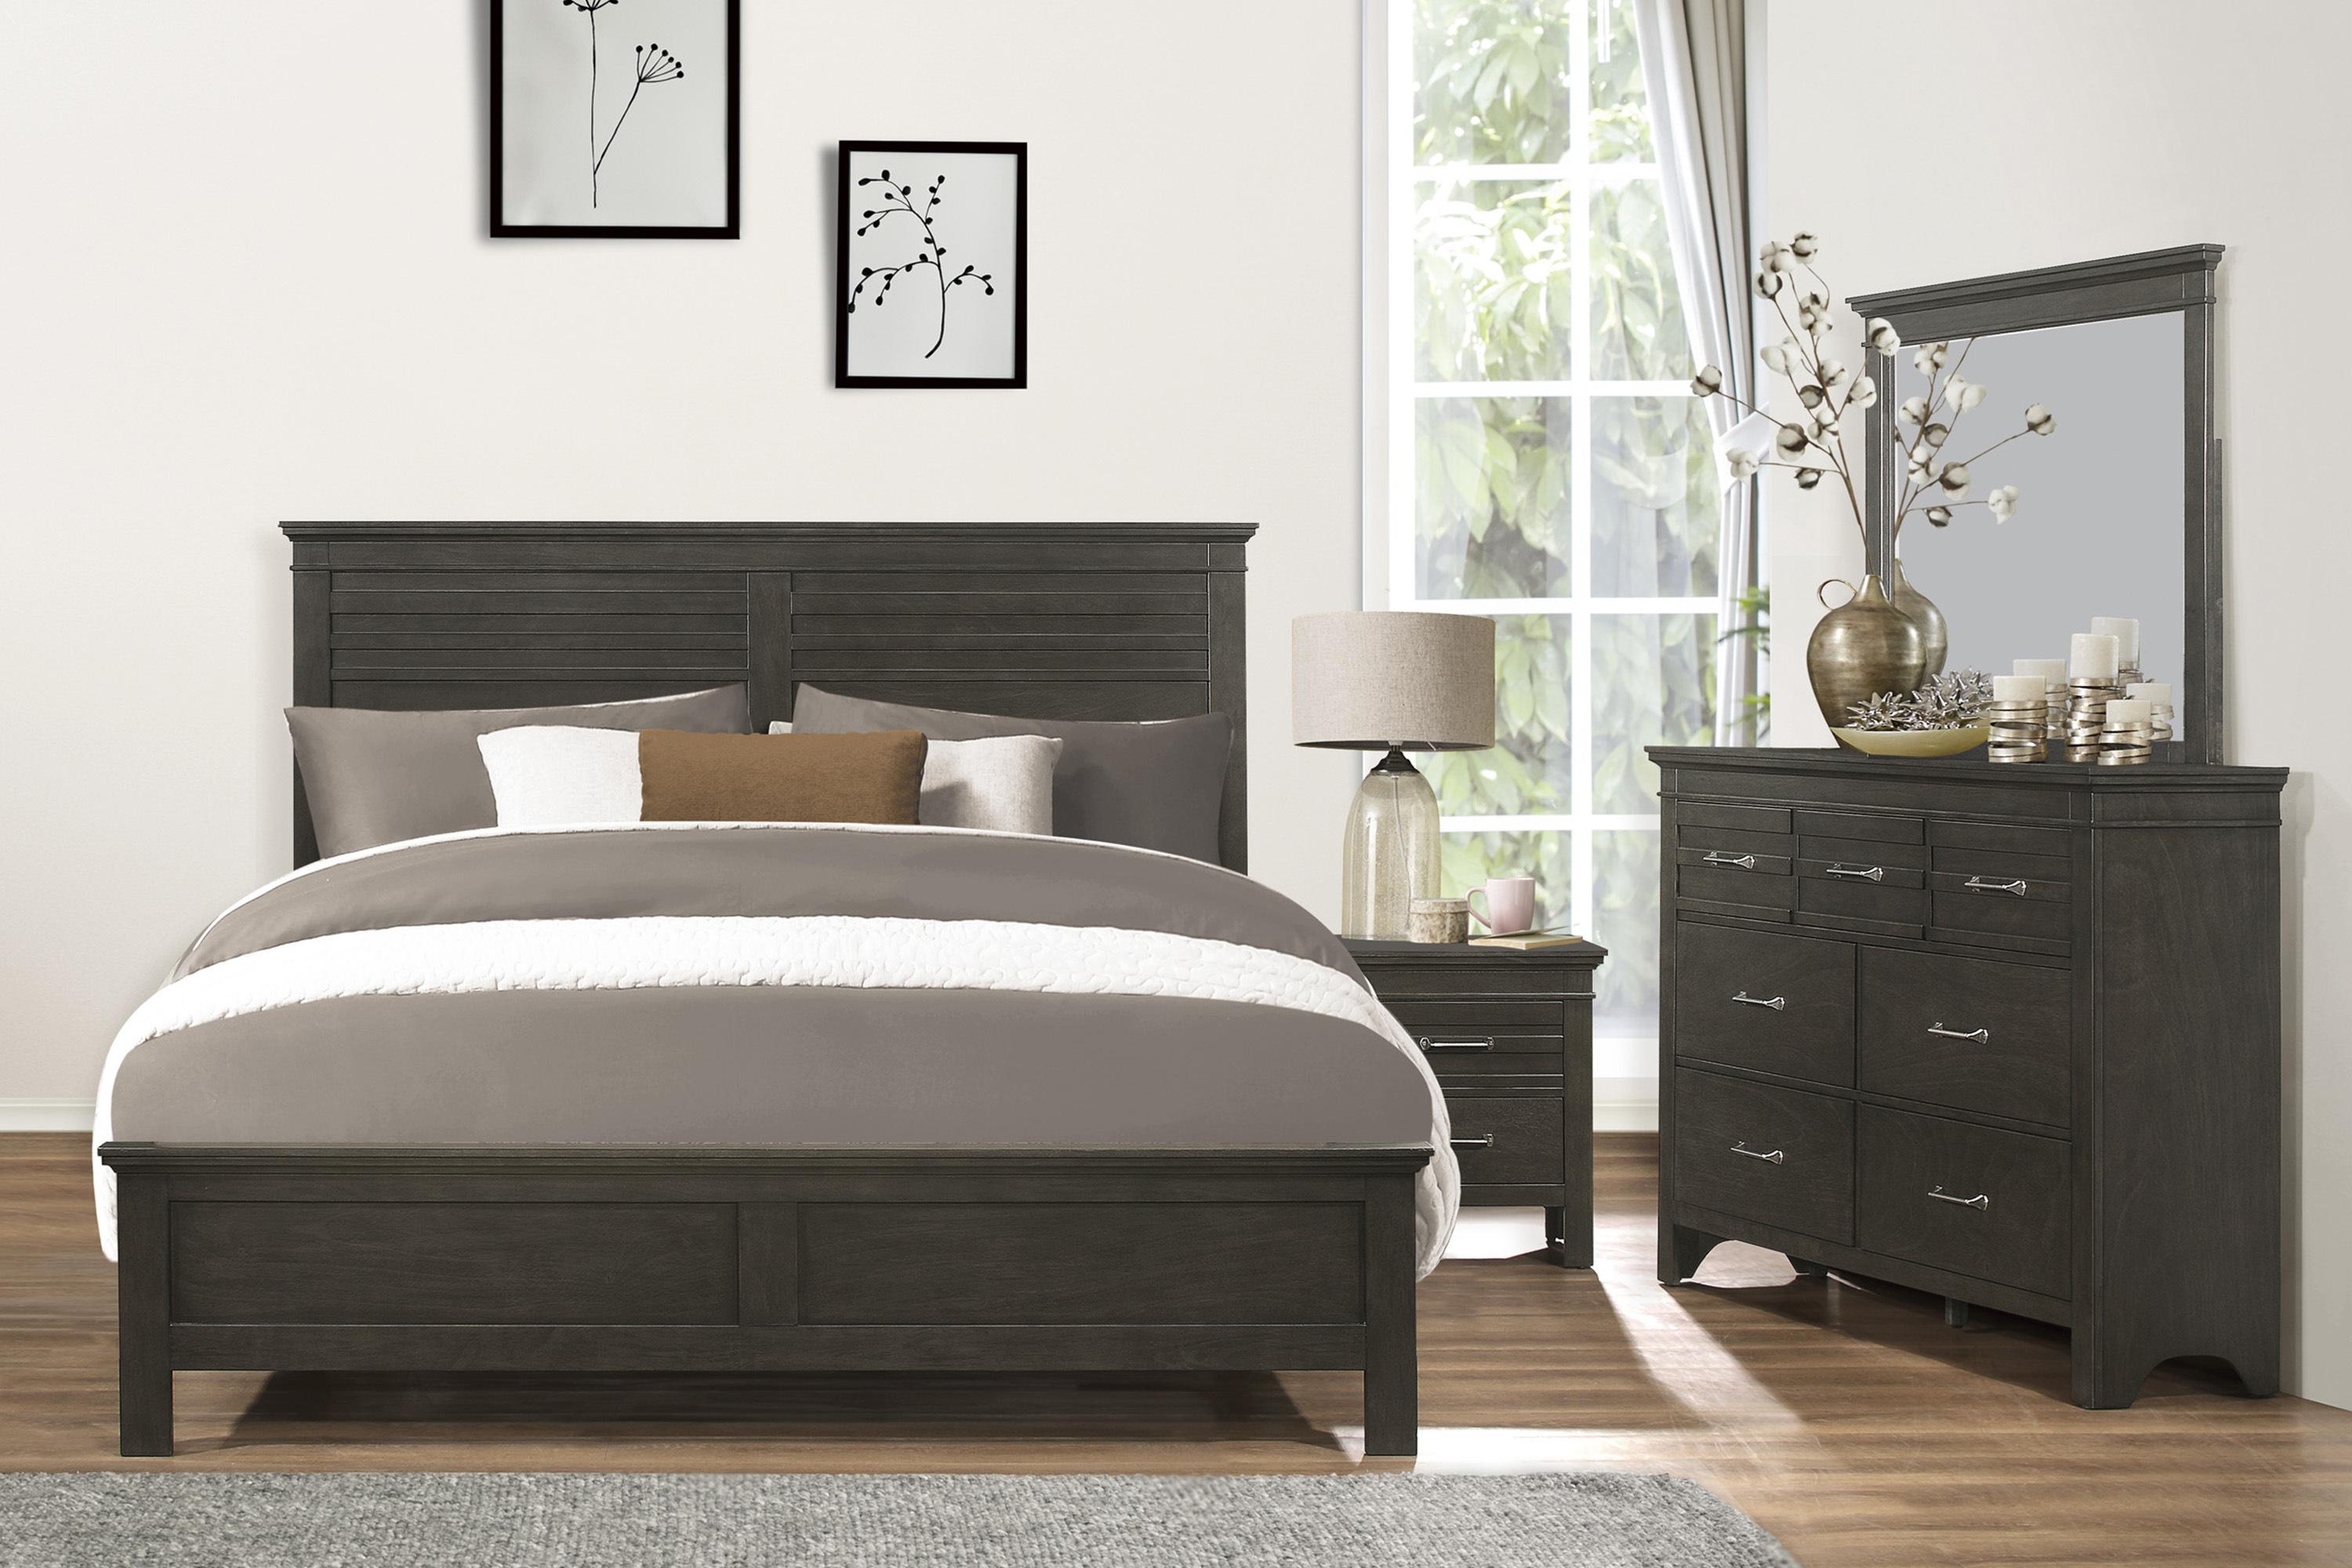 Transitional Bedroom Set 1675-1-5PC Blaire Farm 1675-1-5PC in Charcoal 